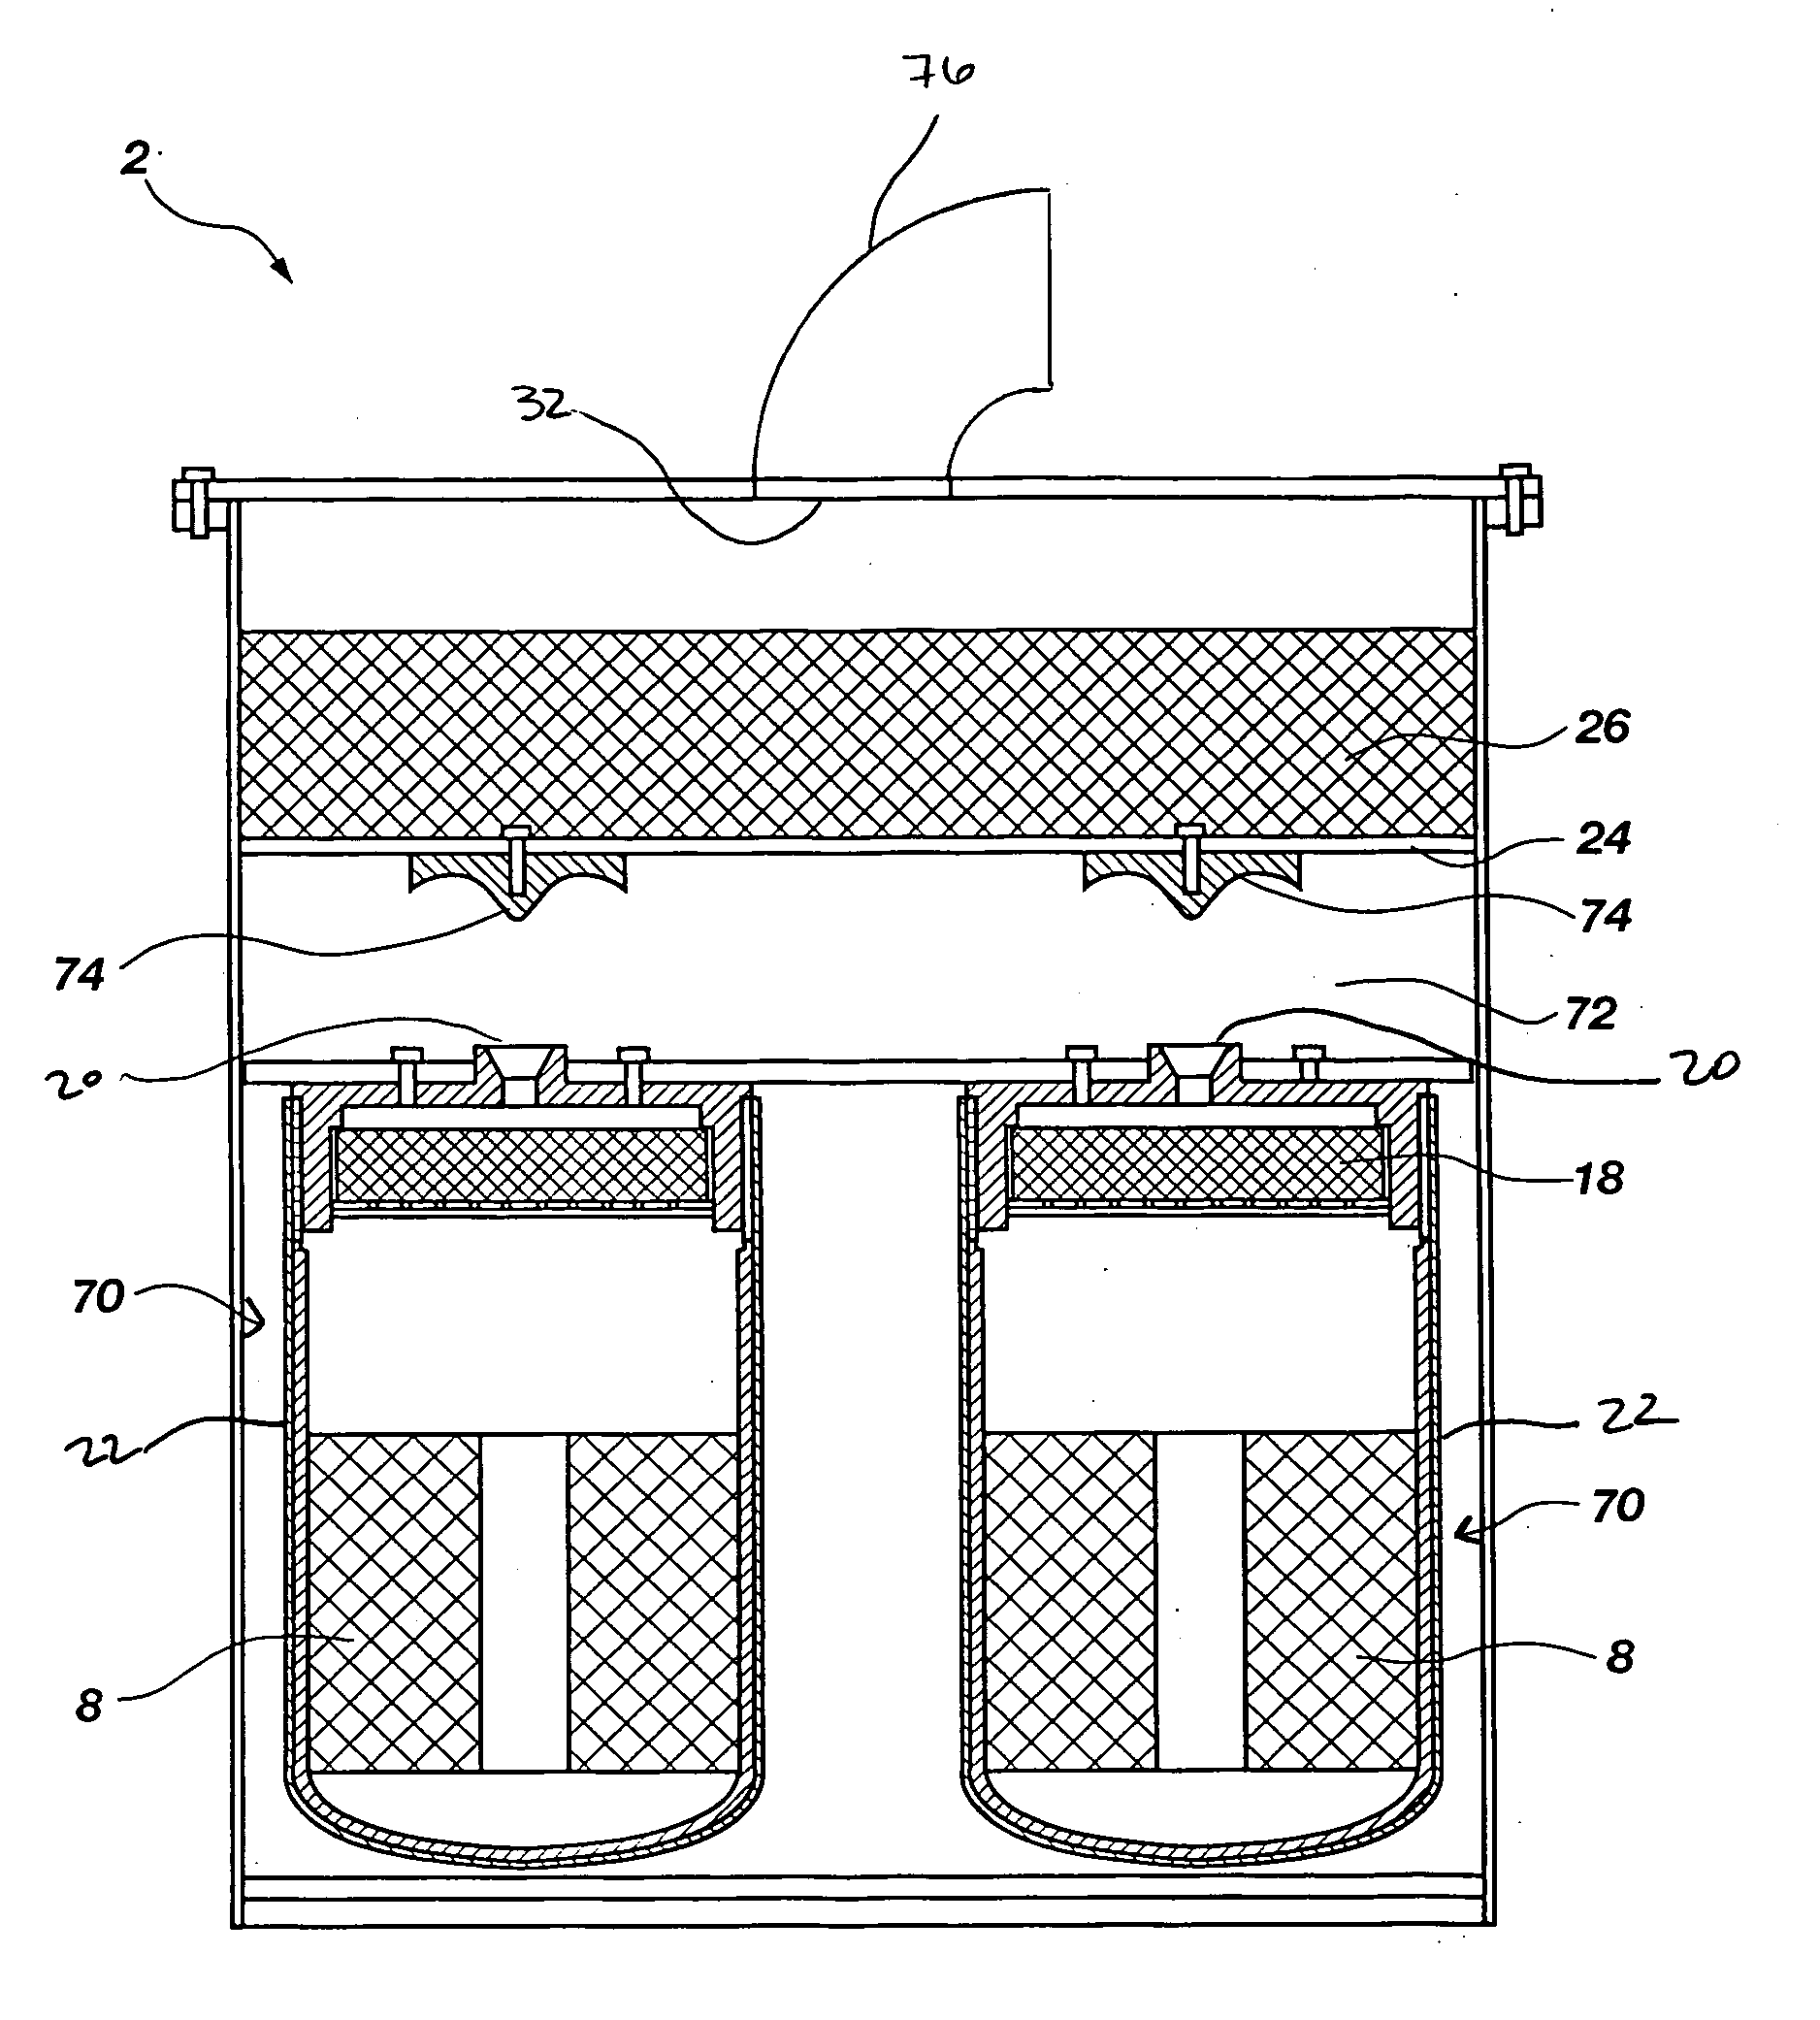 Man-rated fire suppression system and related methods